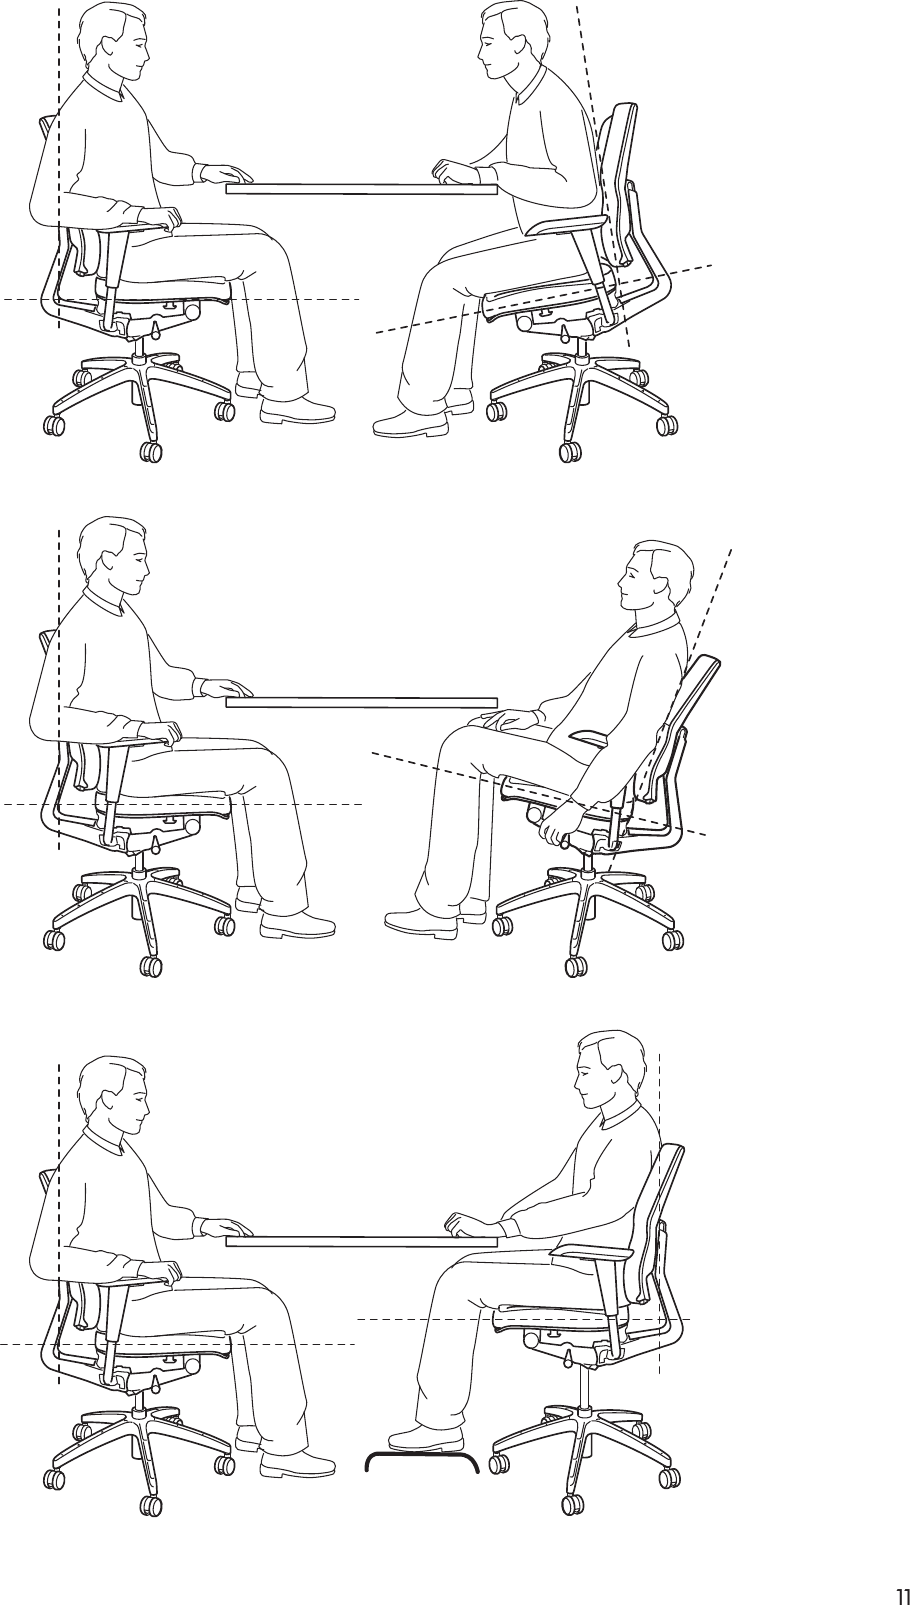 Page 11 of 12 - Ikea Ikea-Klappe-Swivel-Chair-Assembly-Instruction